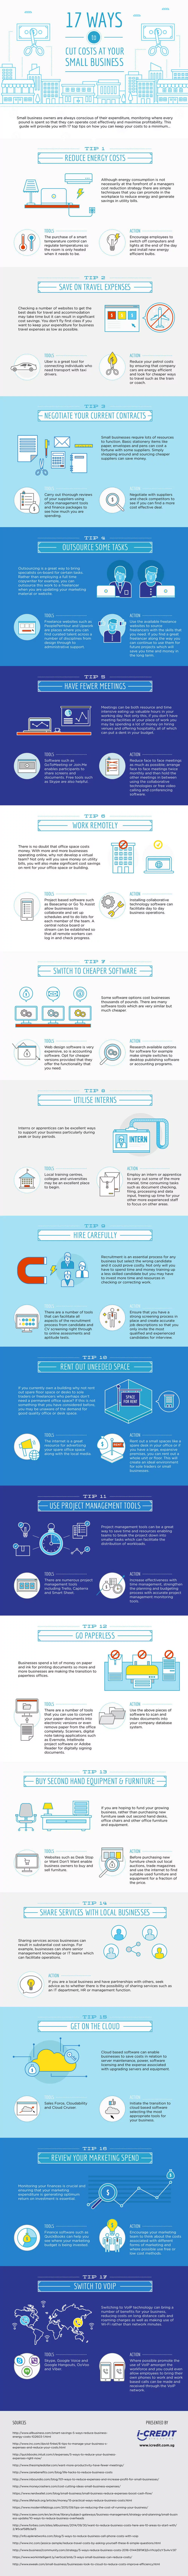 business costs saving infographic